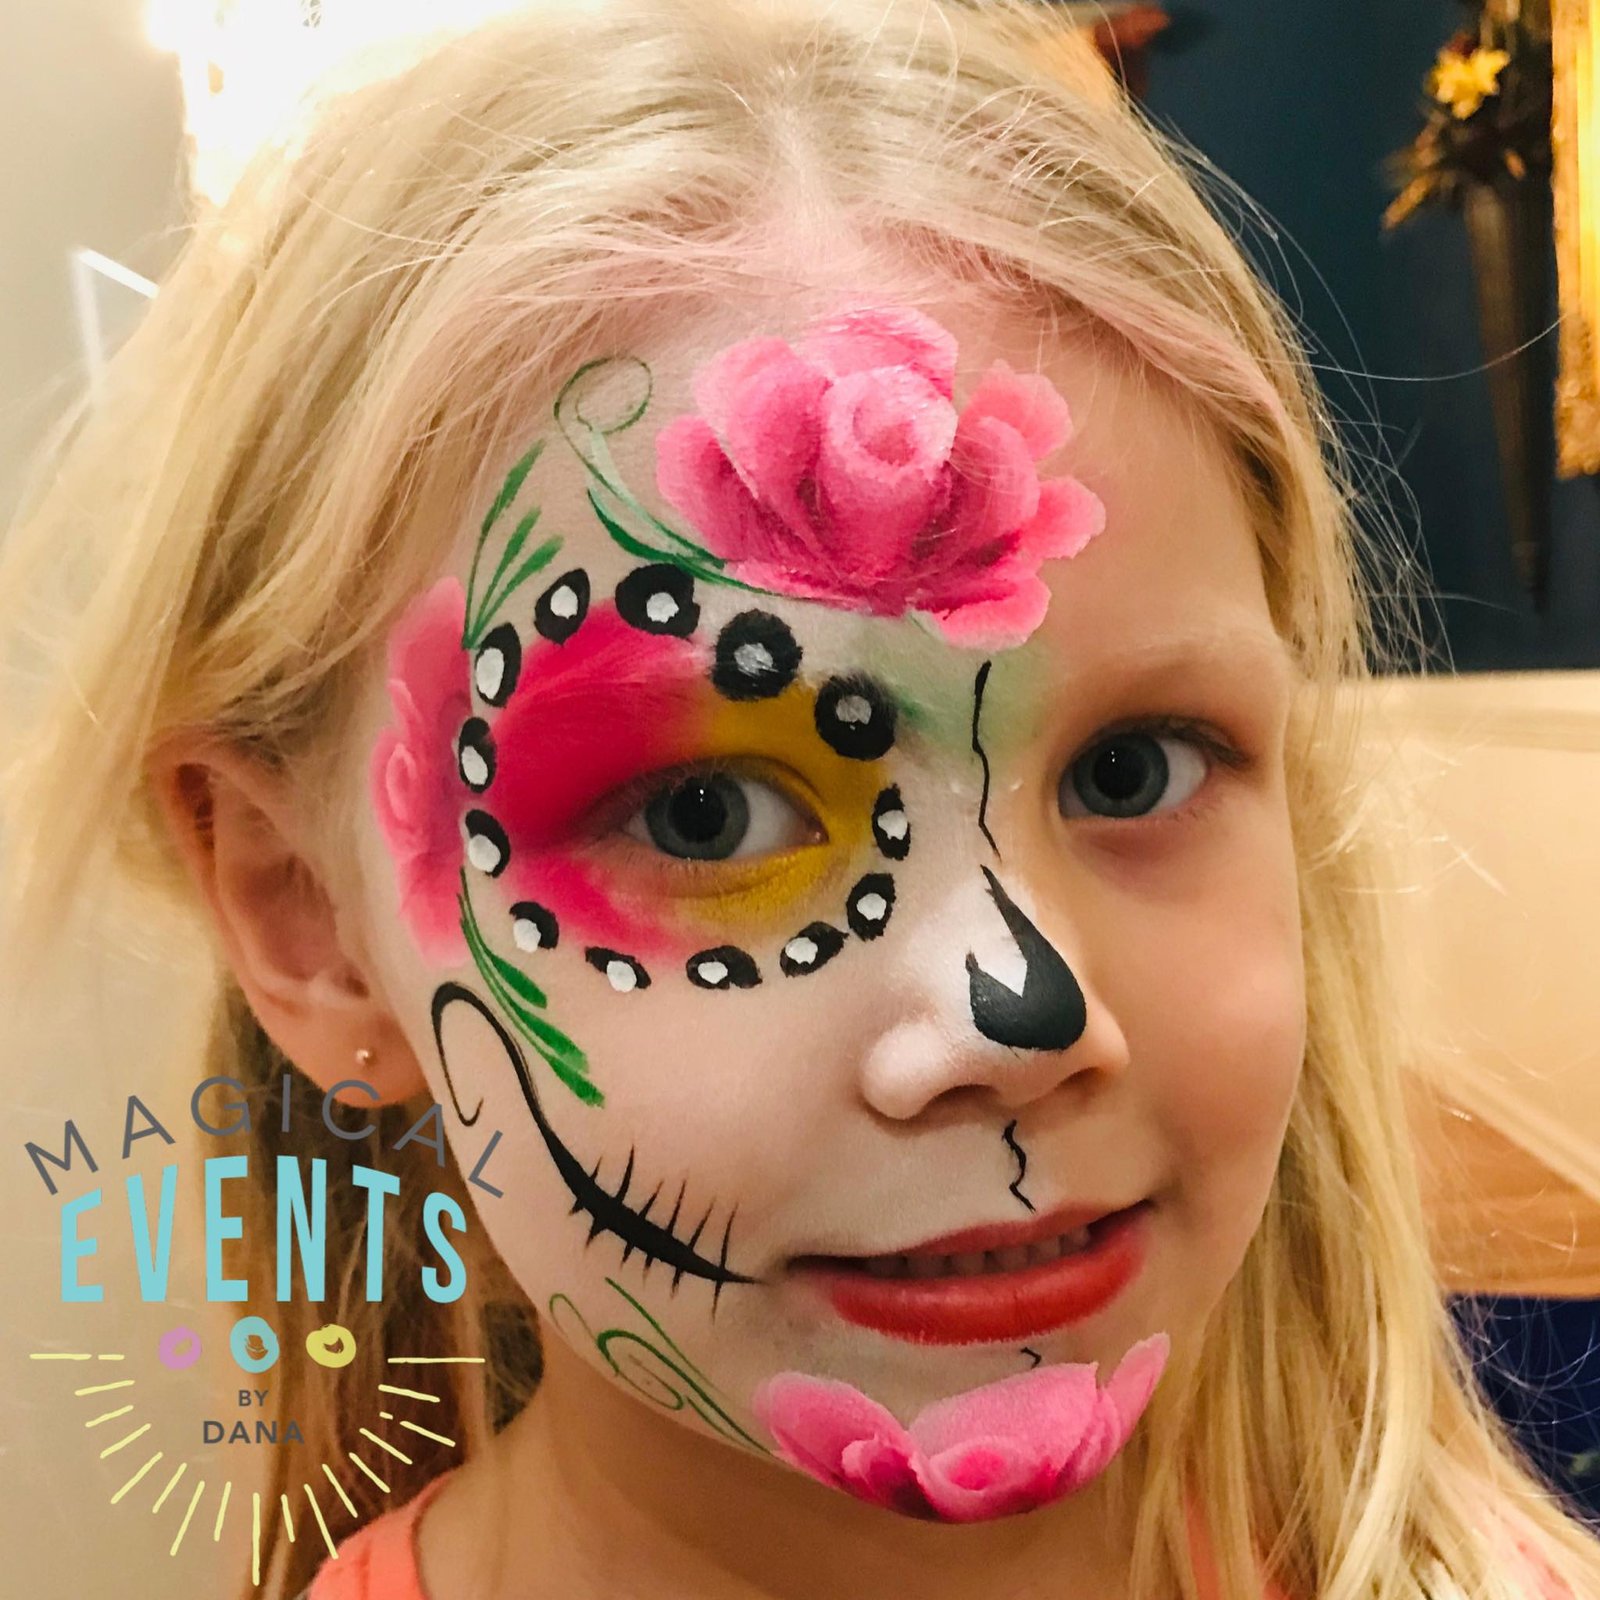 Pricing – Magical Events Face and Balloon Art